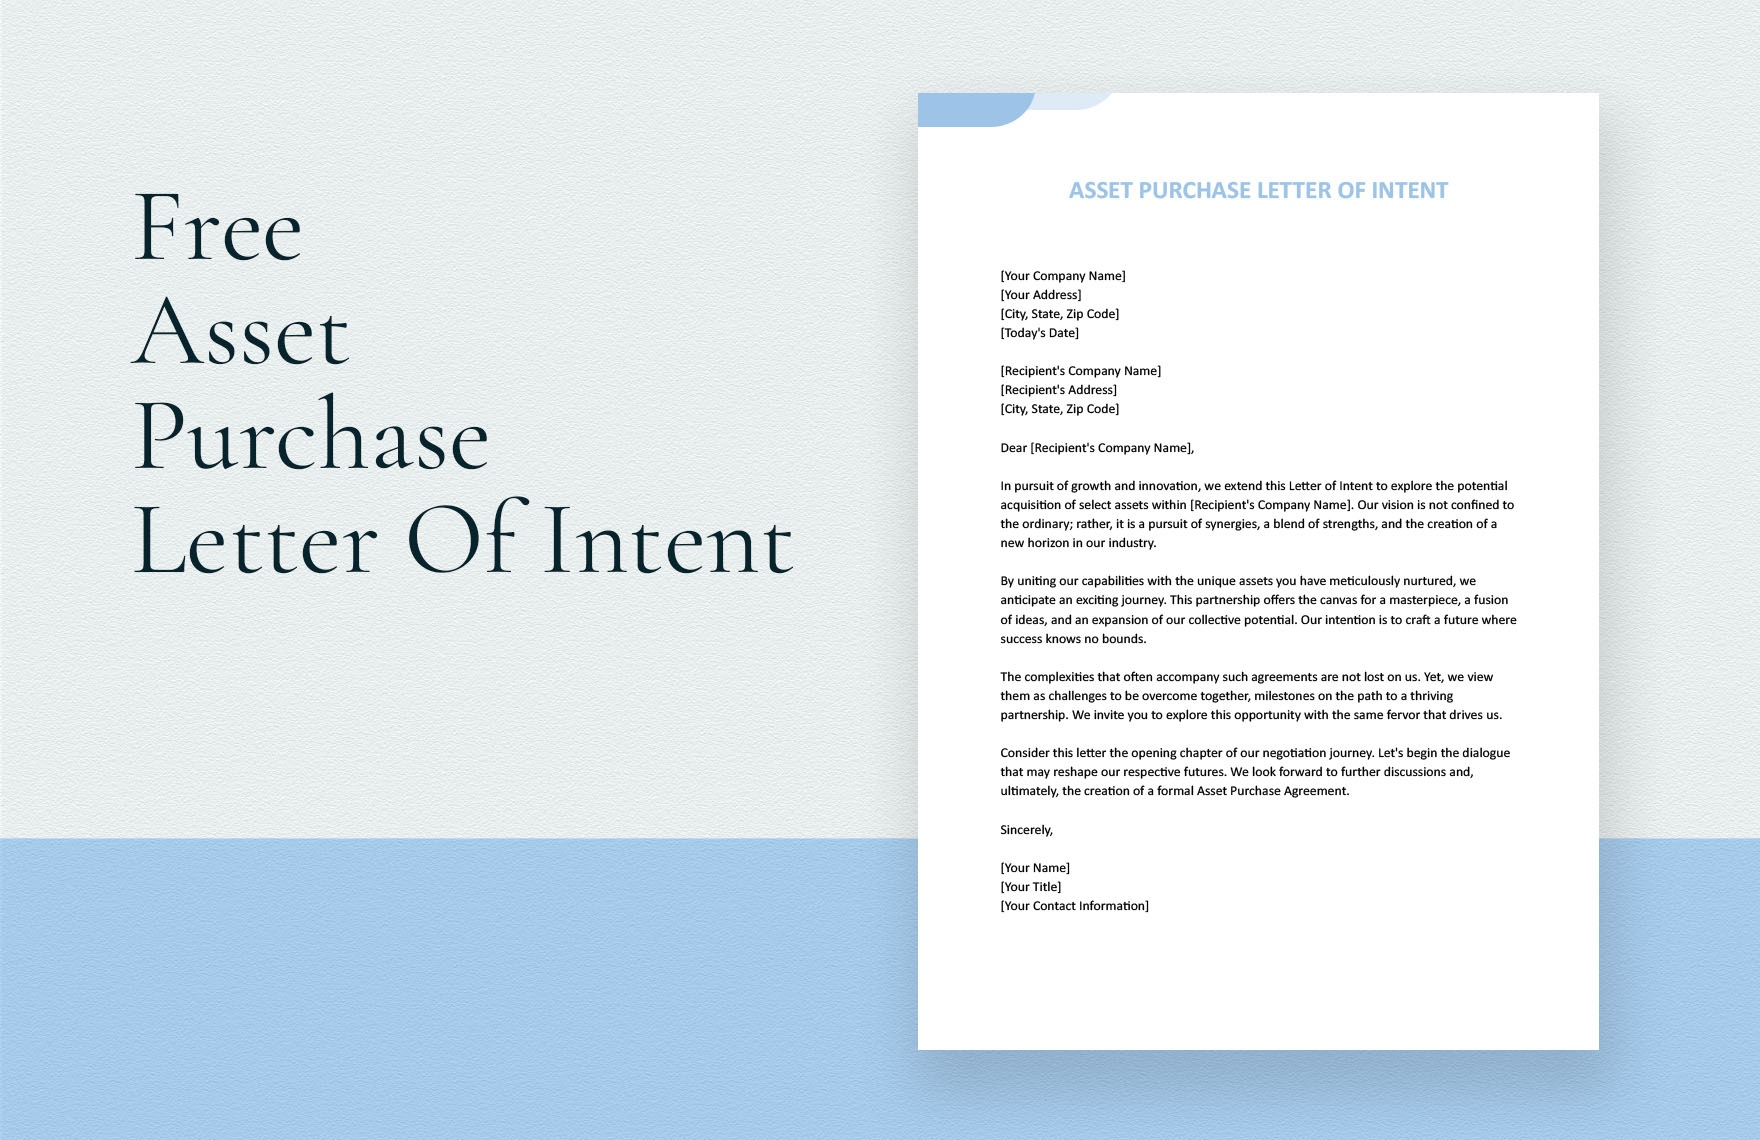 Asset Purchase Letter Of Intent